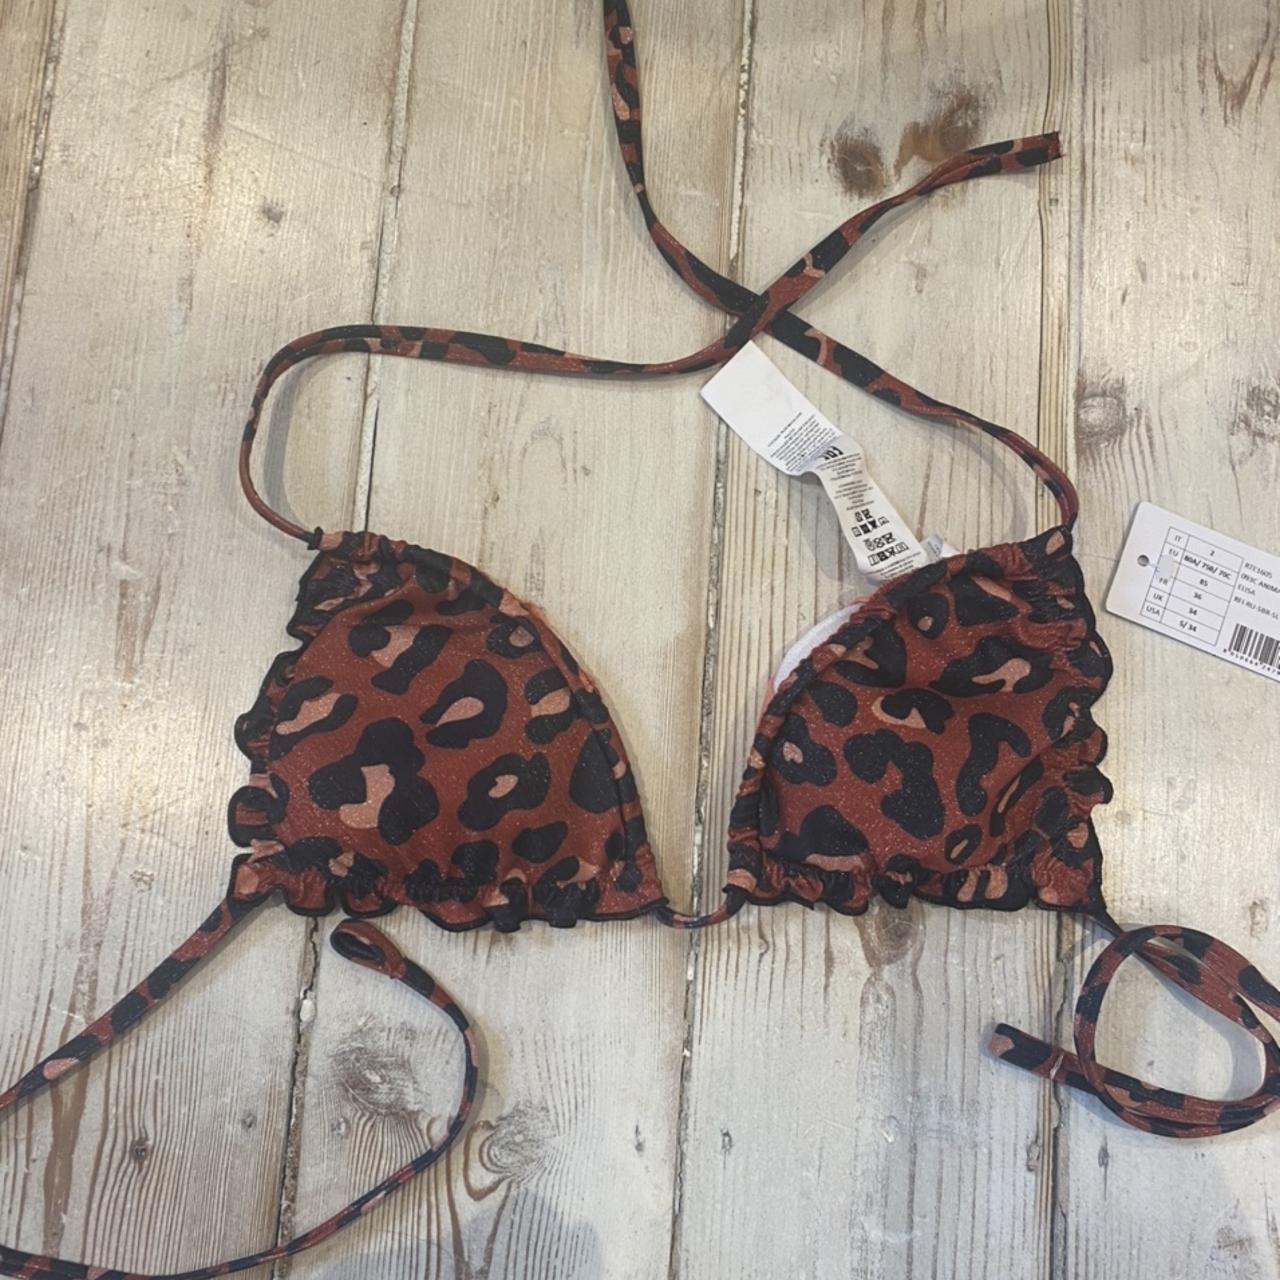 Calzedonia leopard glittery print new with tag - Depop